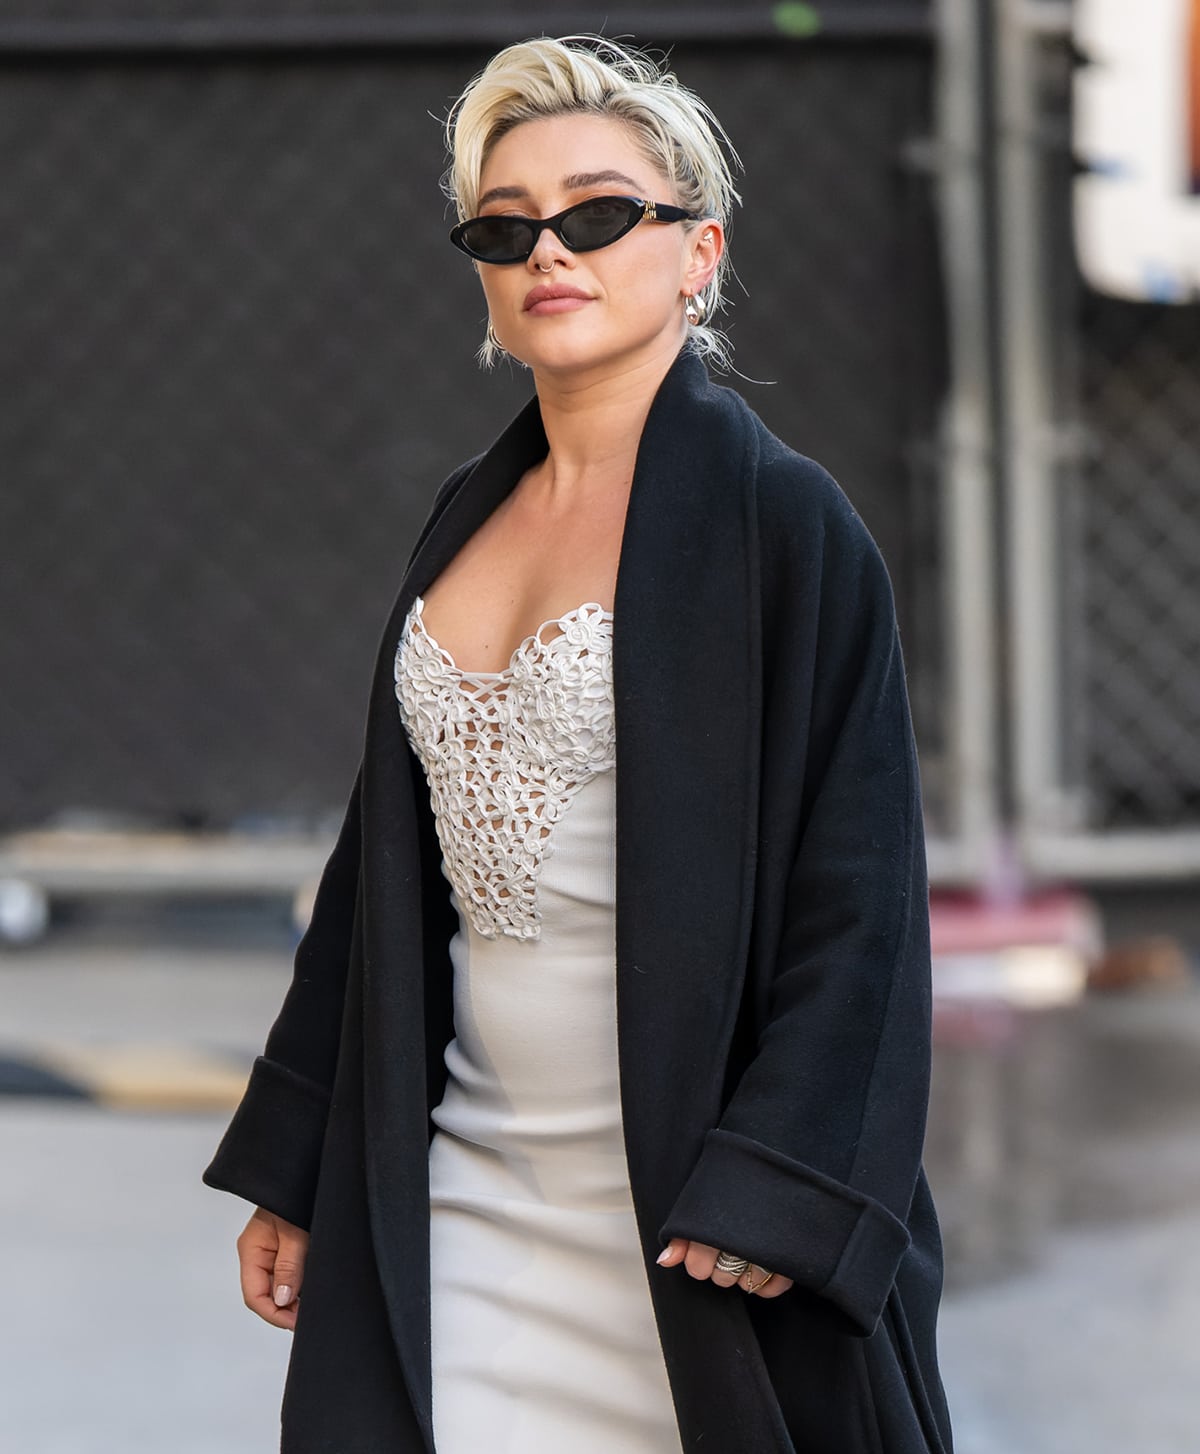 Florence Pugh adds her signature edge to her ethereal white dress by accessorizing with a black wool coat and a sleek pair of Miu Miu sunglasses